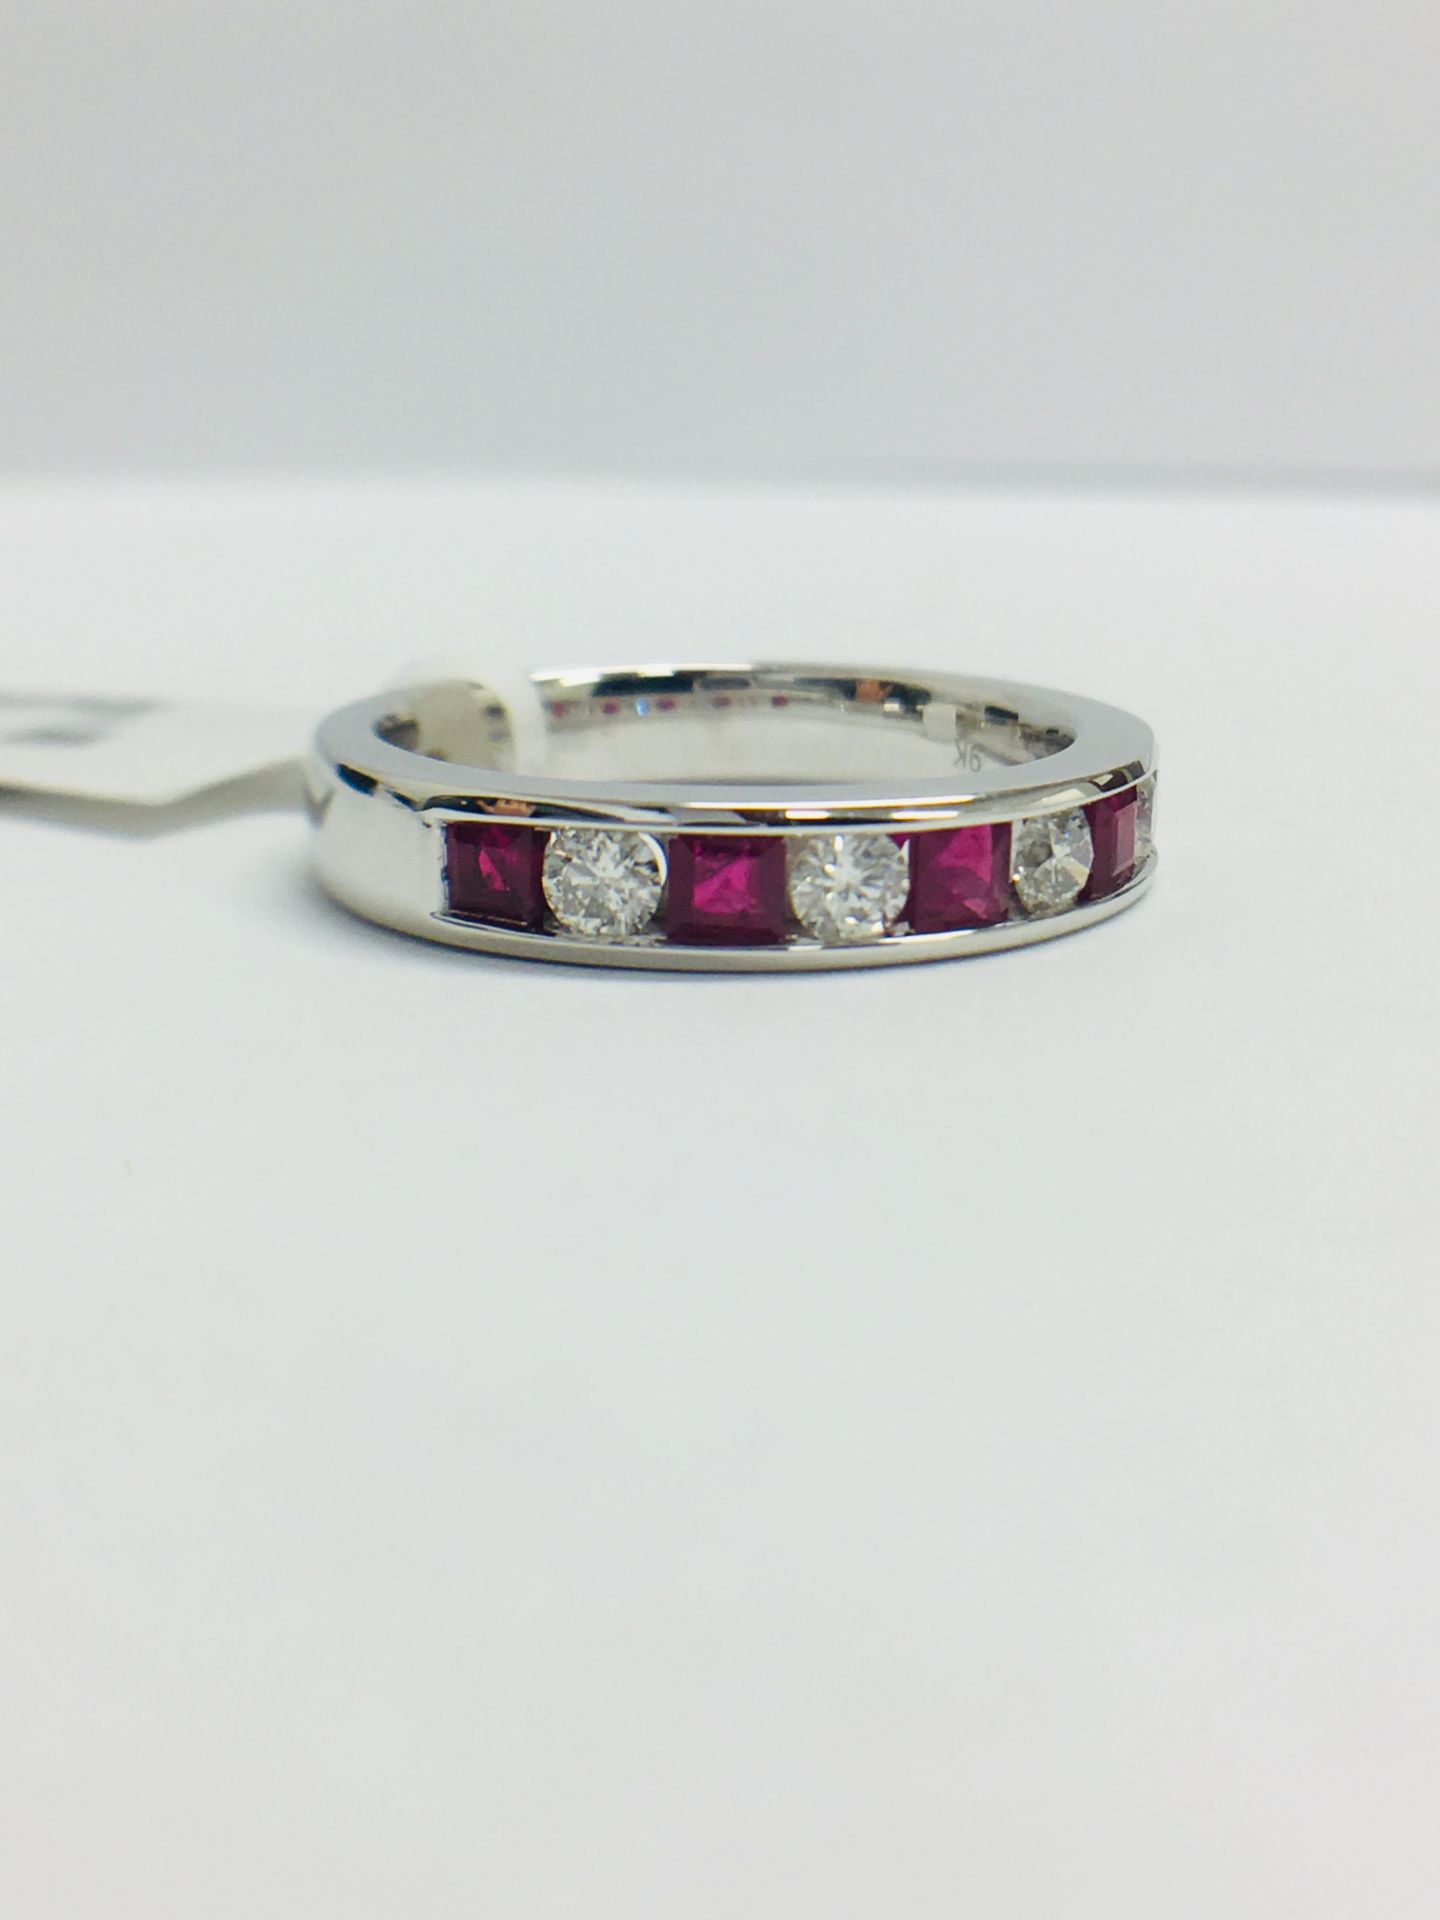 9ct Ruby Diamond Channel Set Eternity Ring - Image 10 of 12